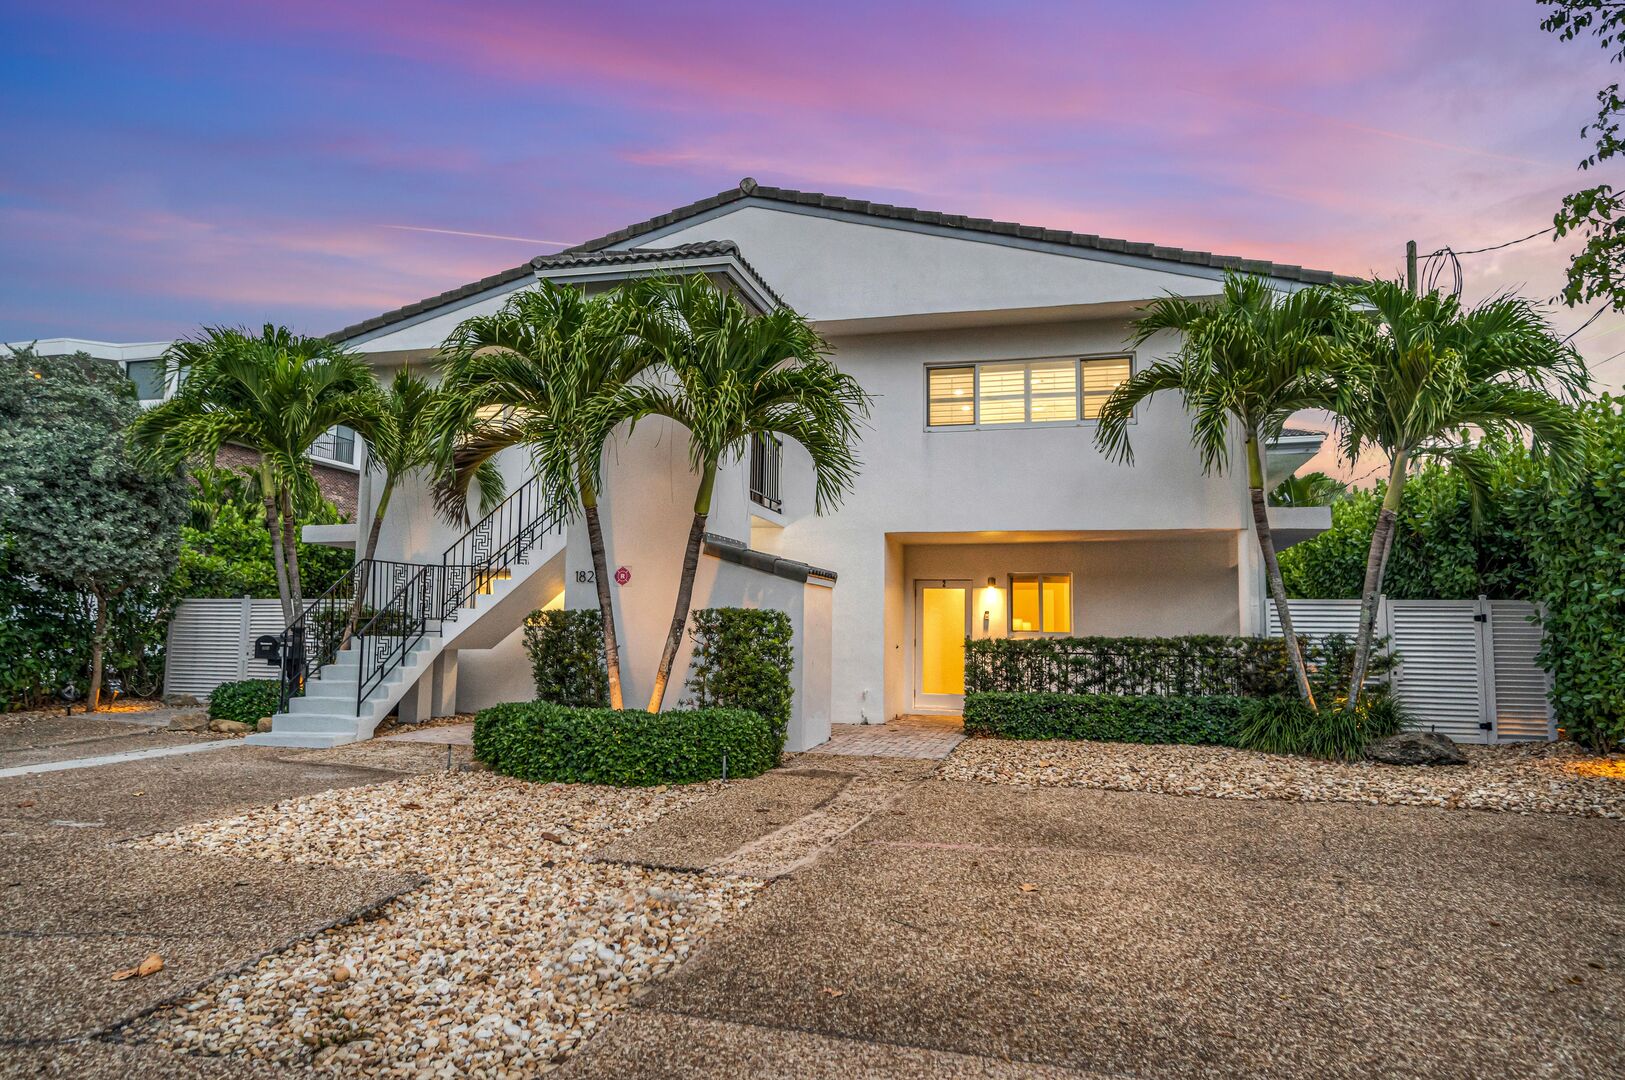 Lago Key is nestled in scenic Harbour Beach neighborhood. Suite Two is on the bottom right and Suite Three is on the bottom left.